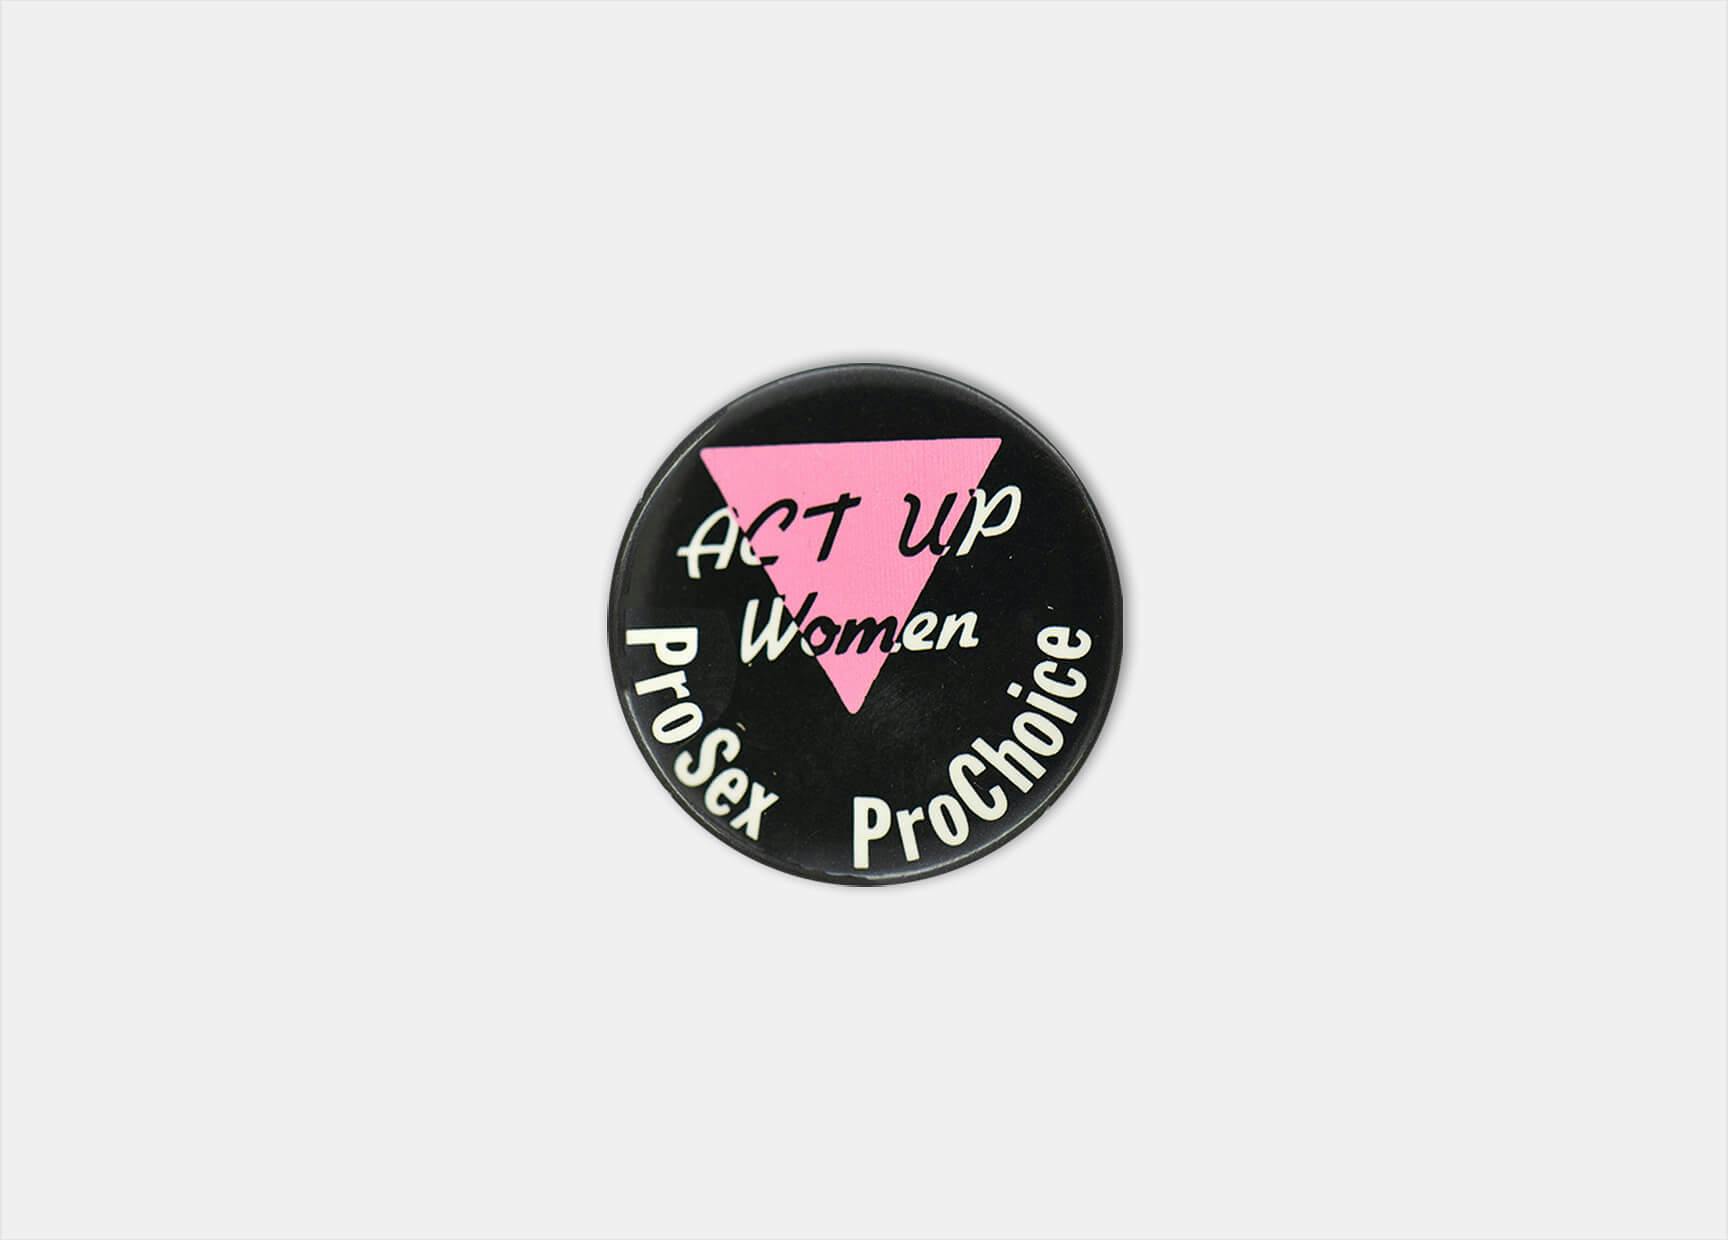 Badge “Act Up Women. ProSex ProChoice” by Act Up Women Group, 1988, design: unknown. Source: IHLIA LGBTI Heritage  